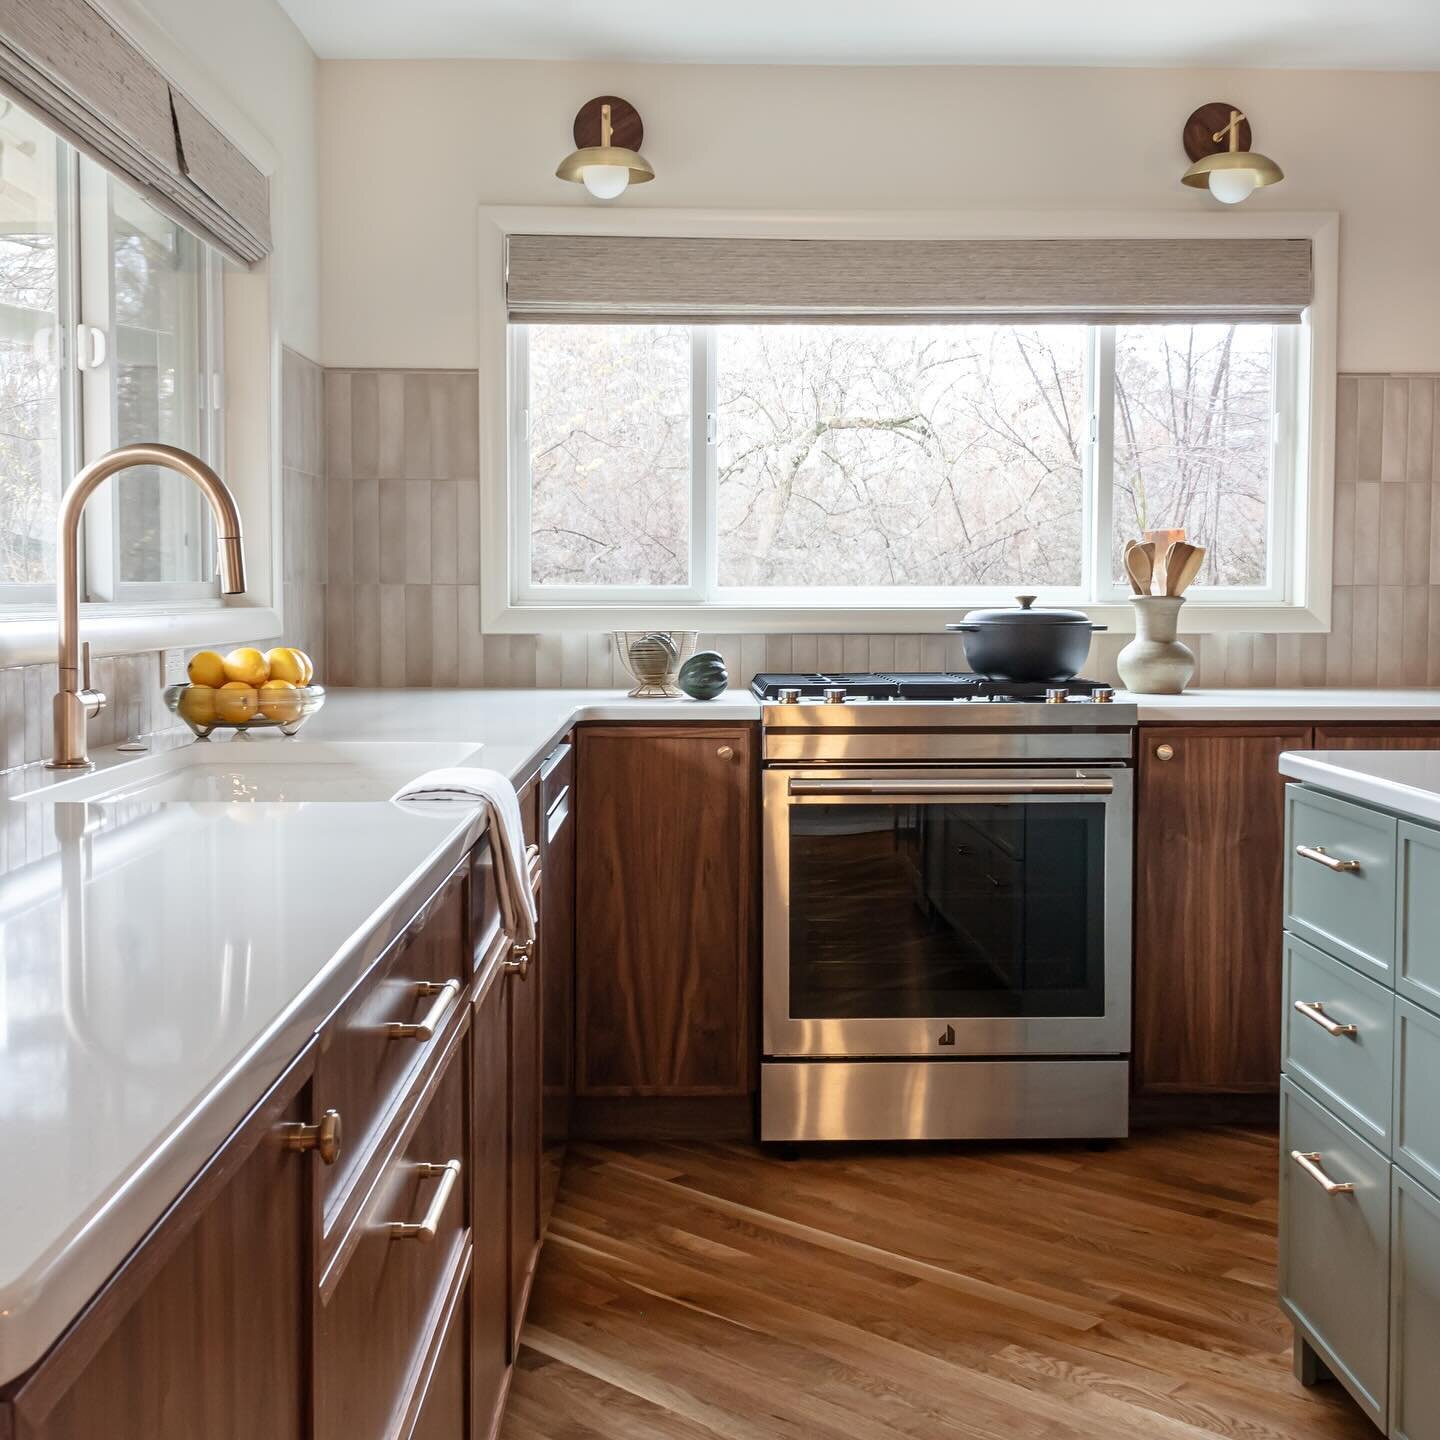 This Walla Walla sunshine has us feeling all light and bright inside! ☀️ This kitchen is a great example of achieving that &ldquo;light and bright&rdquo; aesthetic while still incorporating rich, walnut cabinetry and dark, textured tile. 

#kitchende